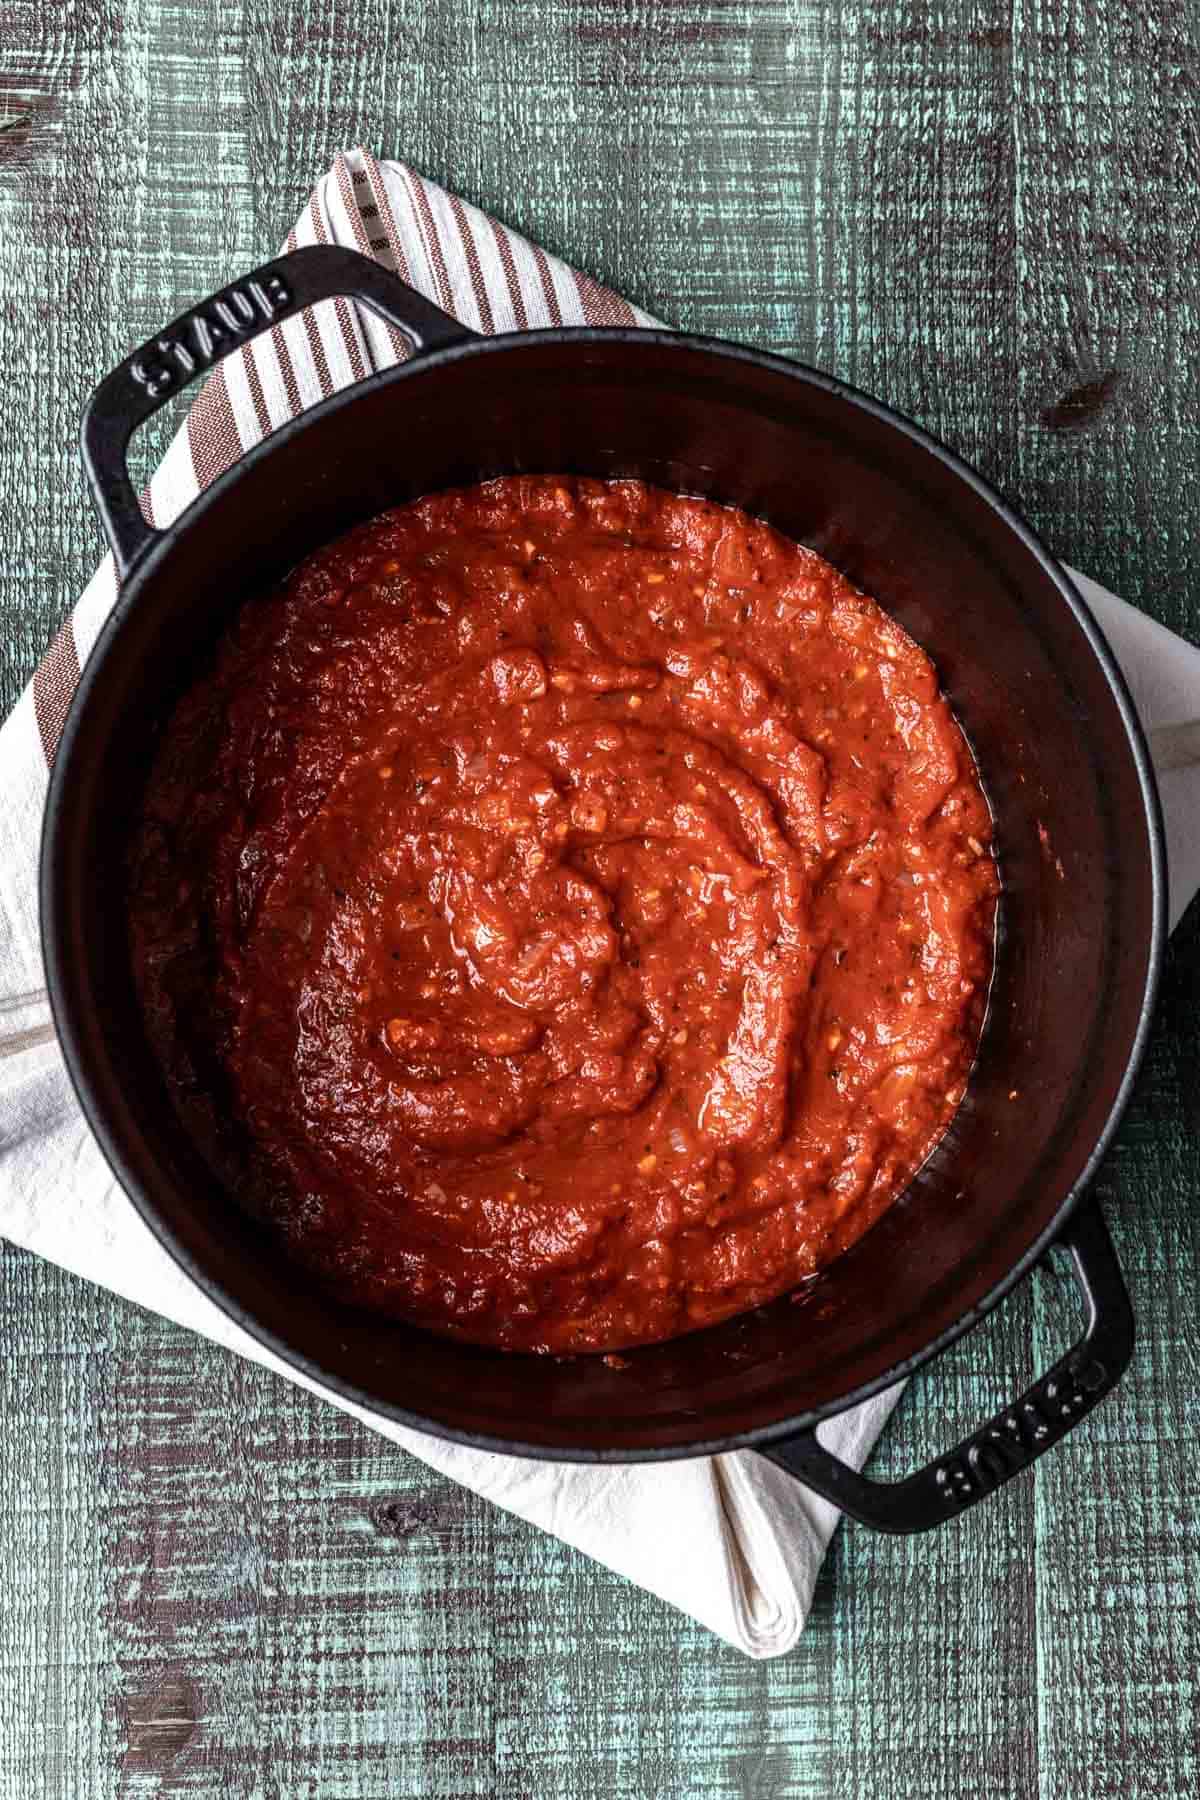 Thickened tomato sauce in a black pot.